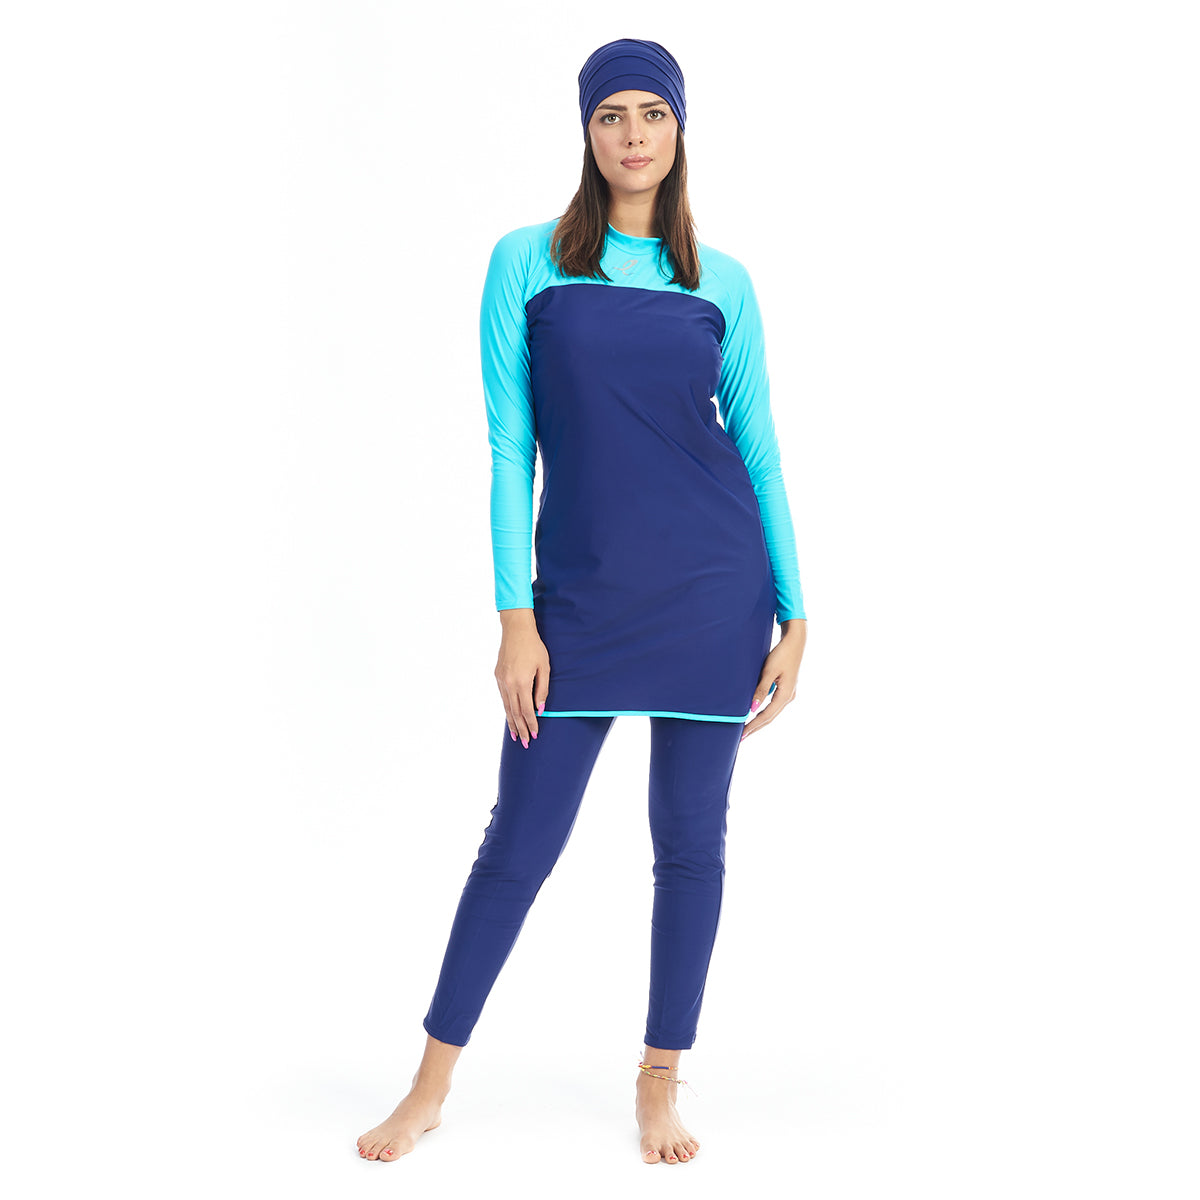 Energetics Full Covered Swimsuit For Women, Top, Pants + Bonnet, Navy & Blue - 3 Pieces